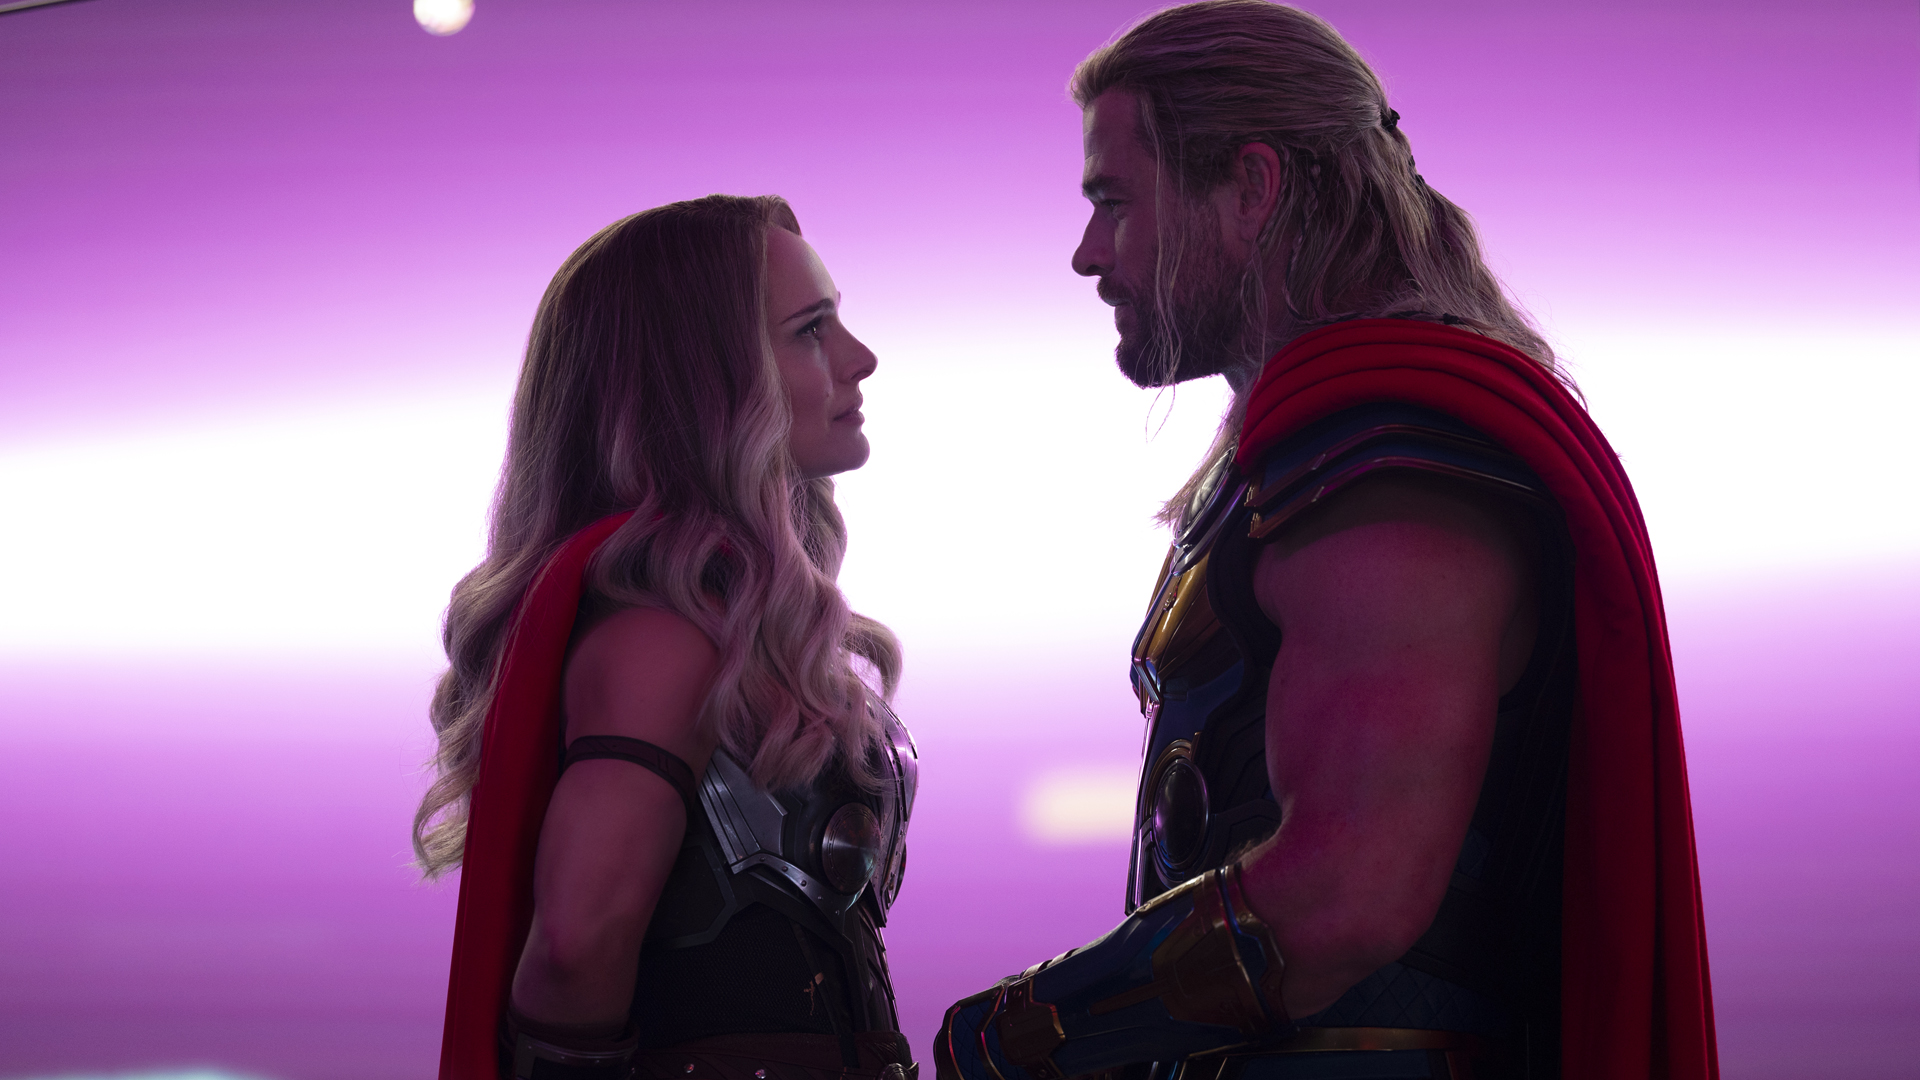 Thor and Jane Foster come face to face in another realm in Thor: Love and Thunder